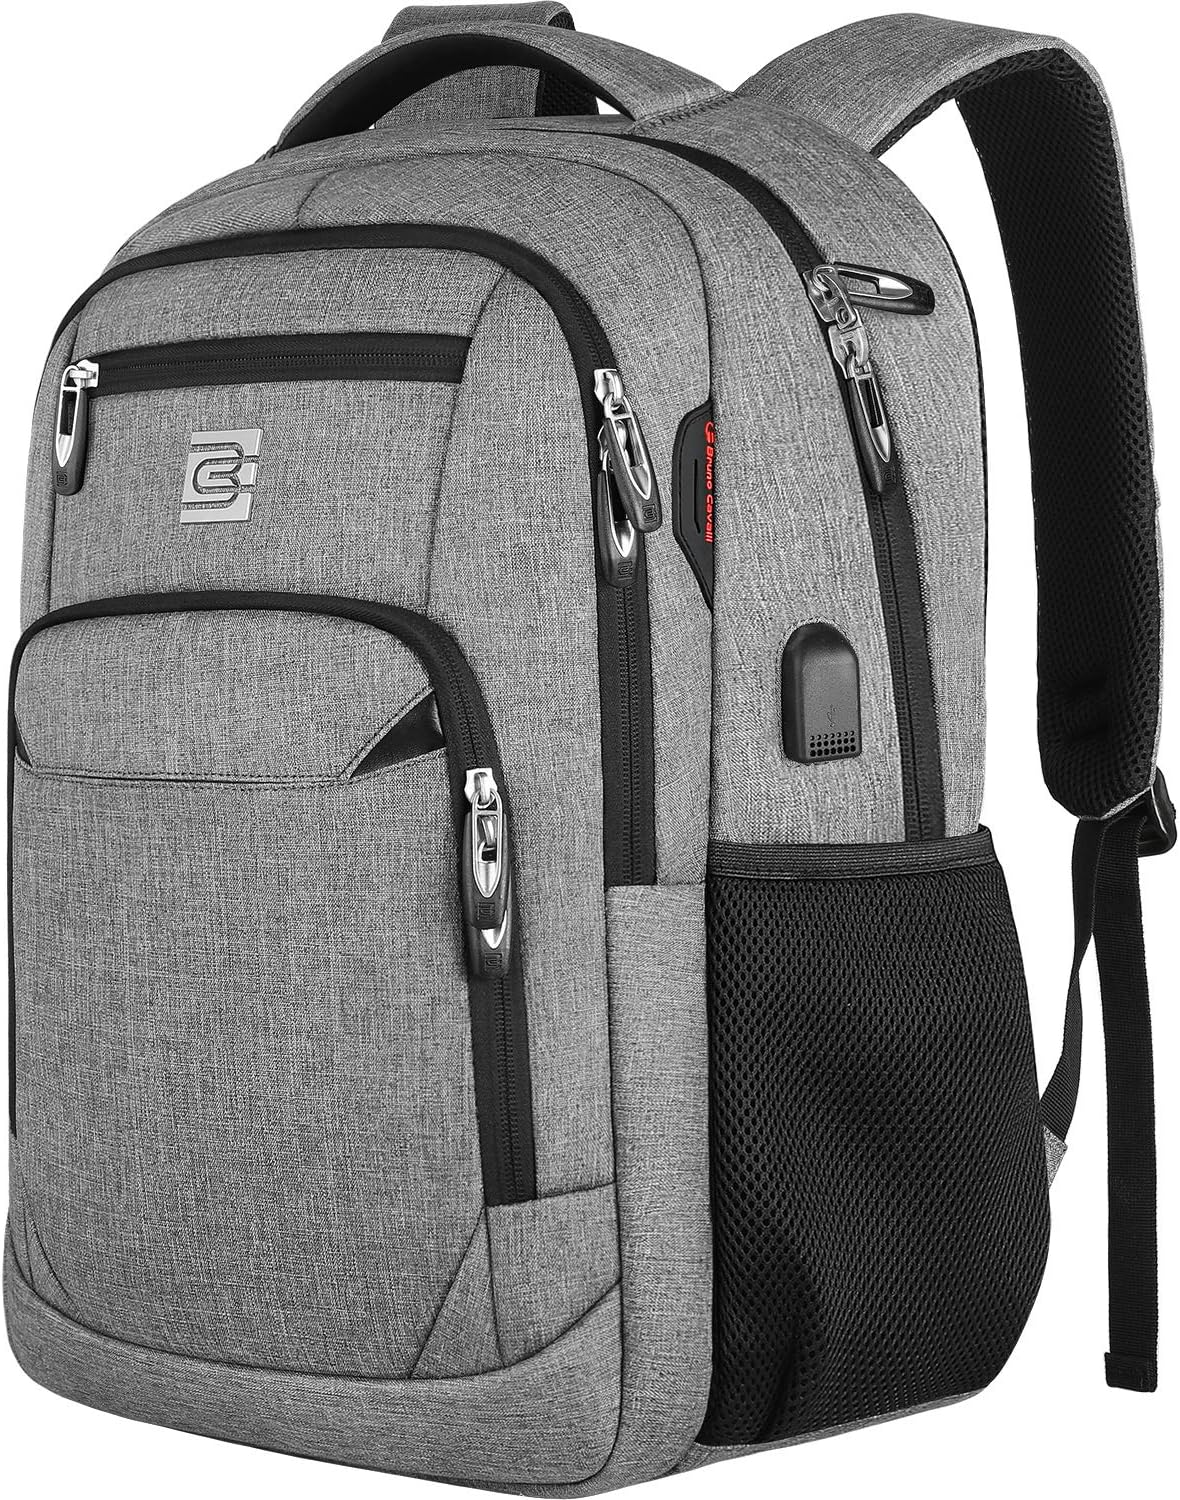 Bruno Cavalli Laptop Backpack with USB Charging Port Fit 15.6 inch Notebook